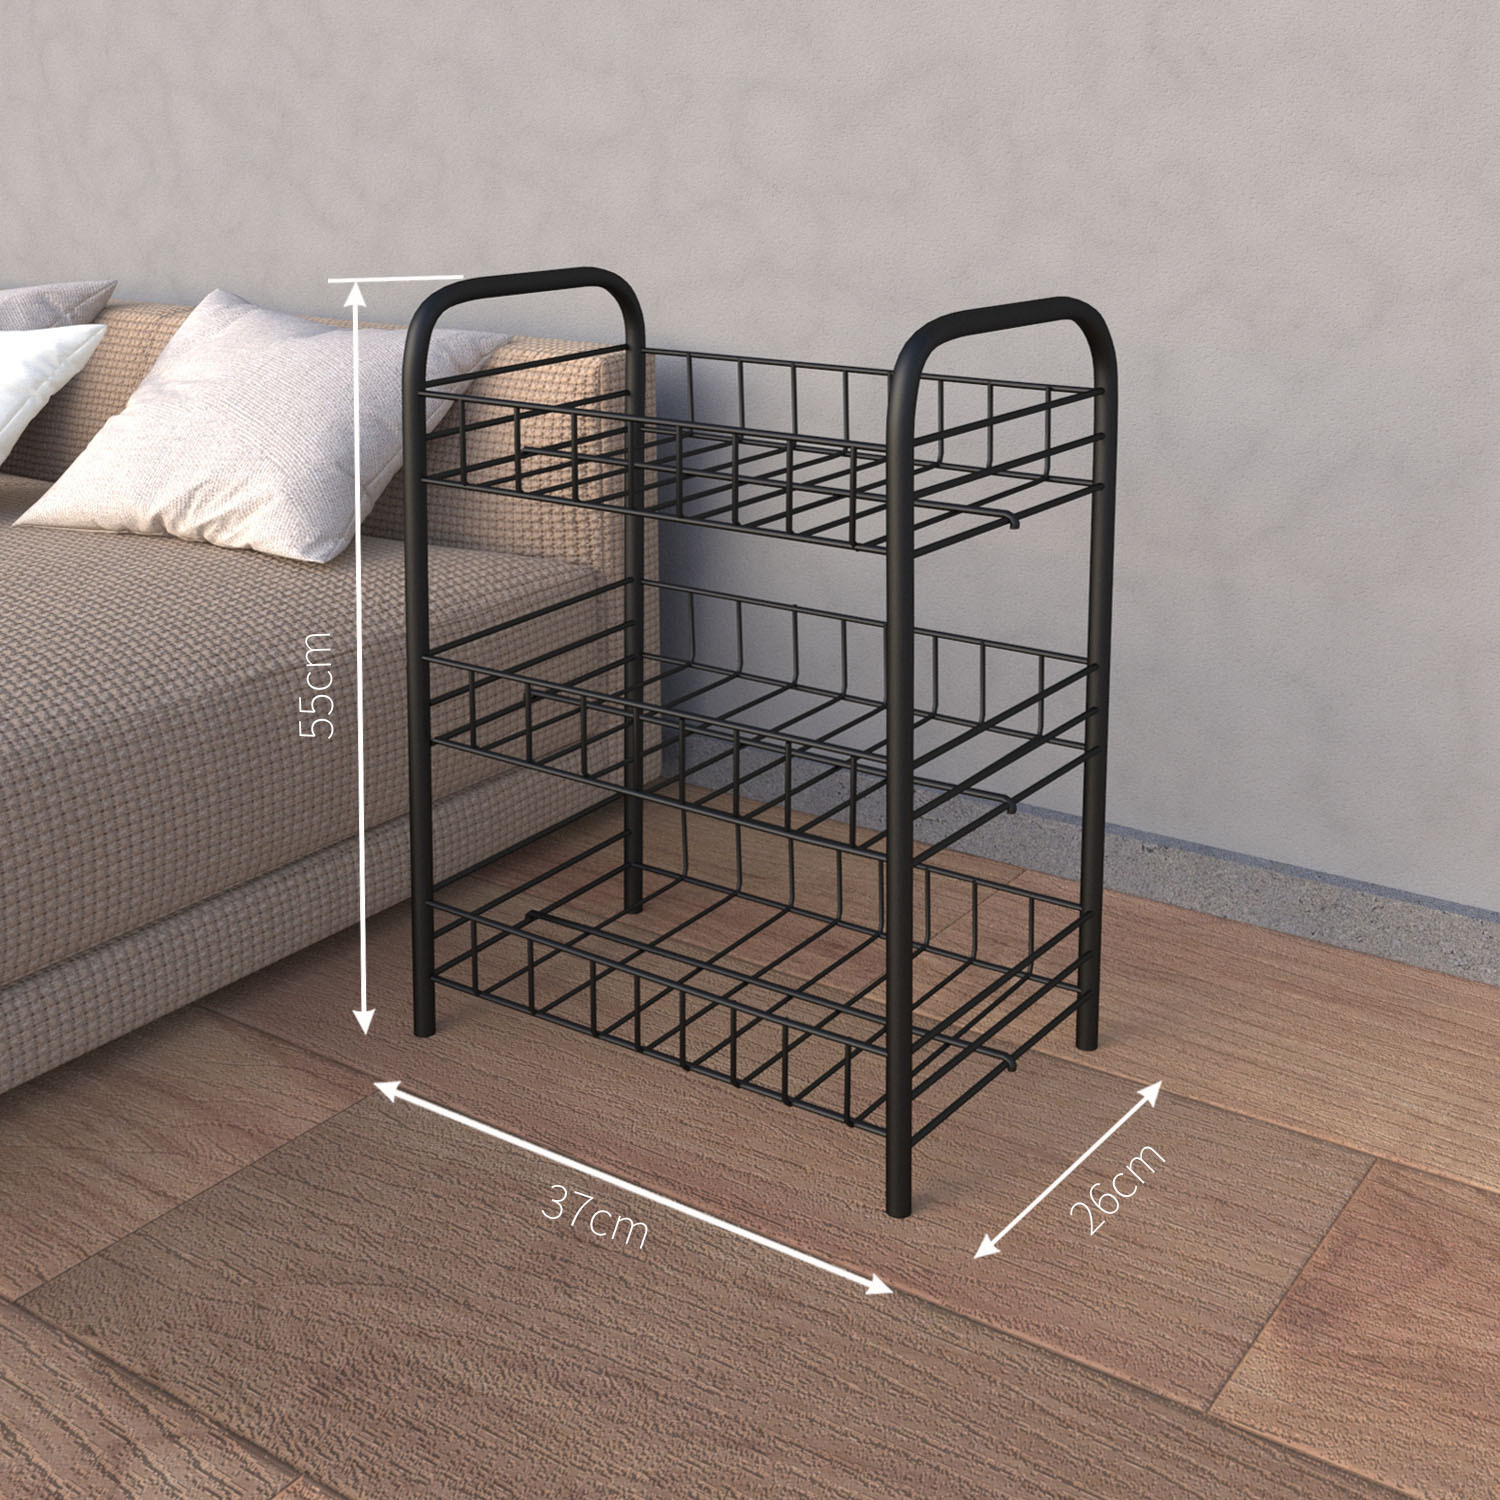 3 layers of black-iron wire rack